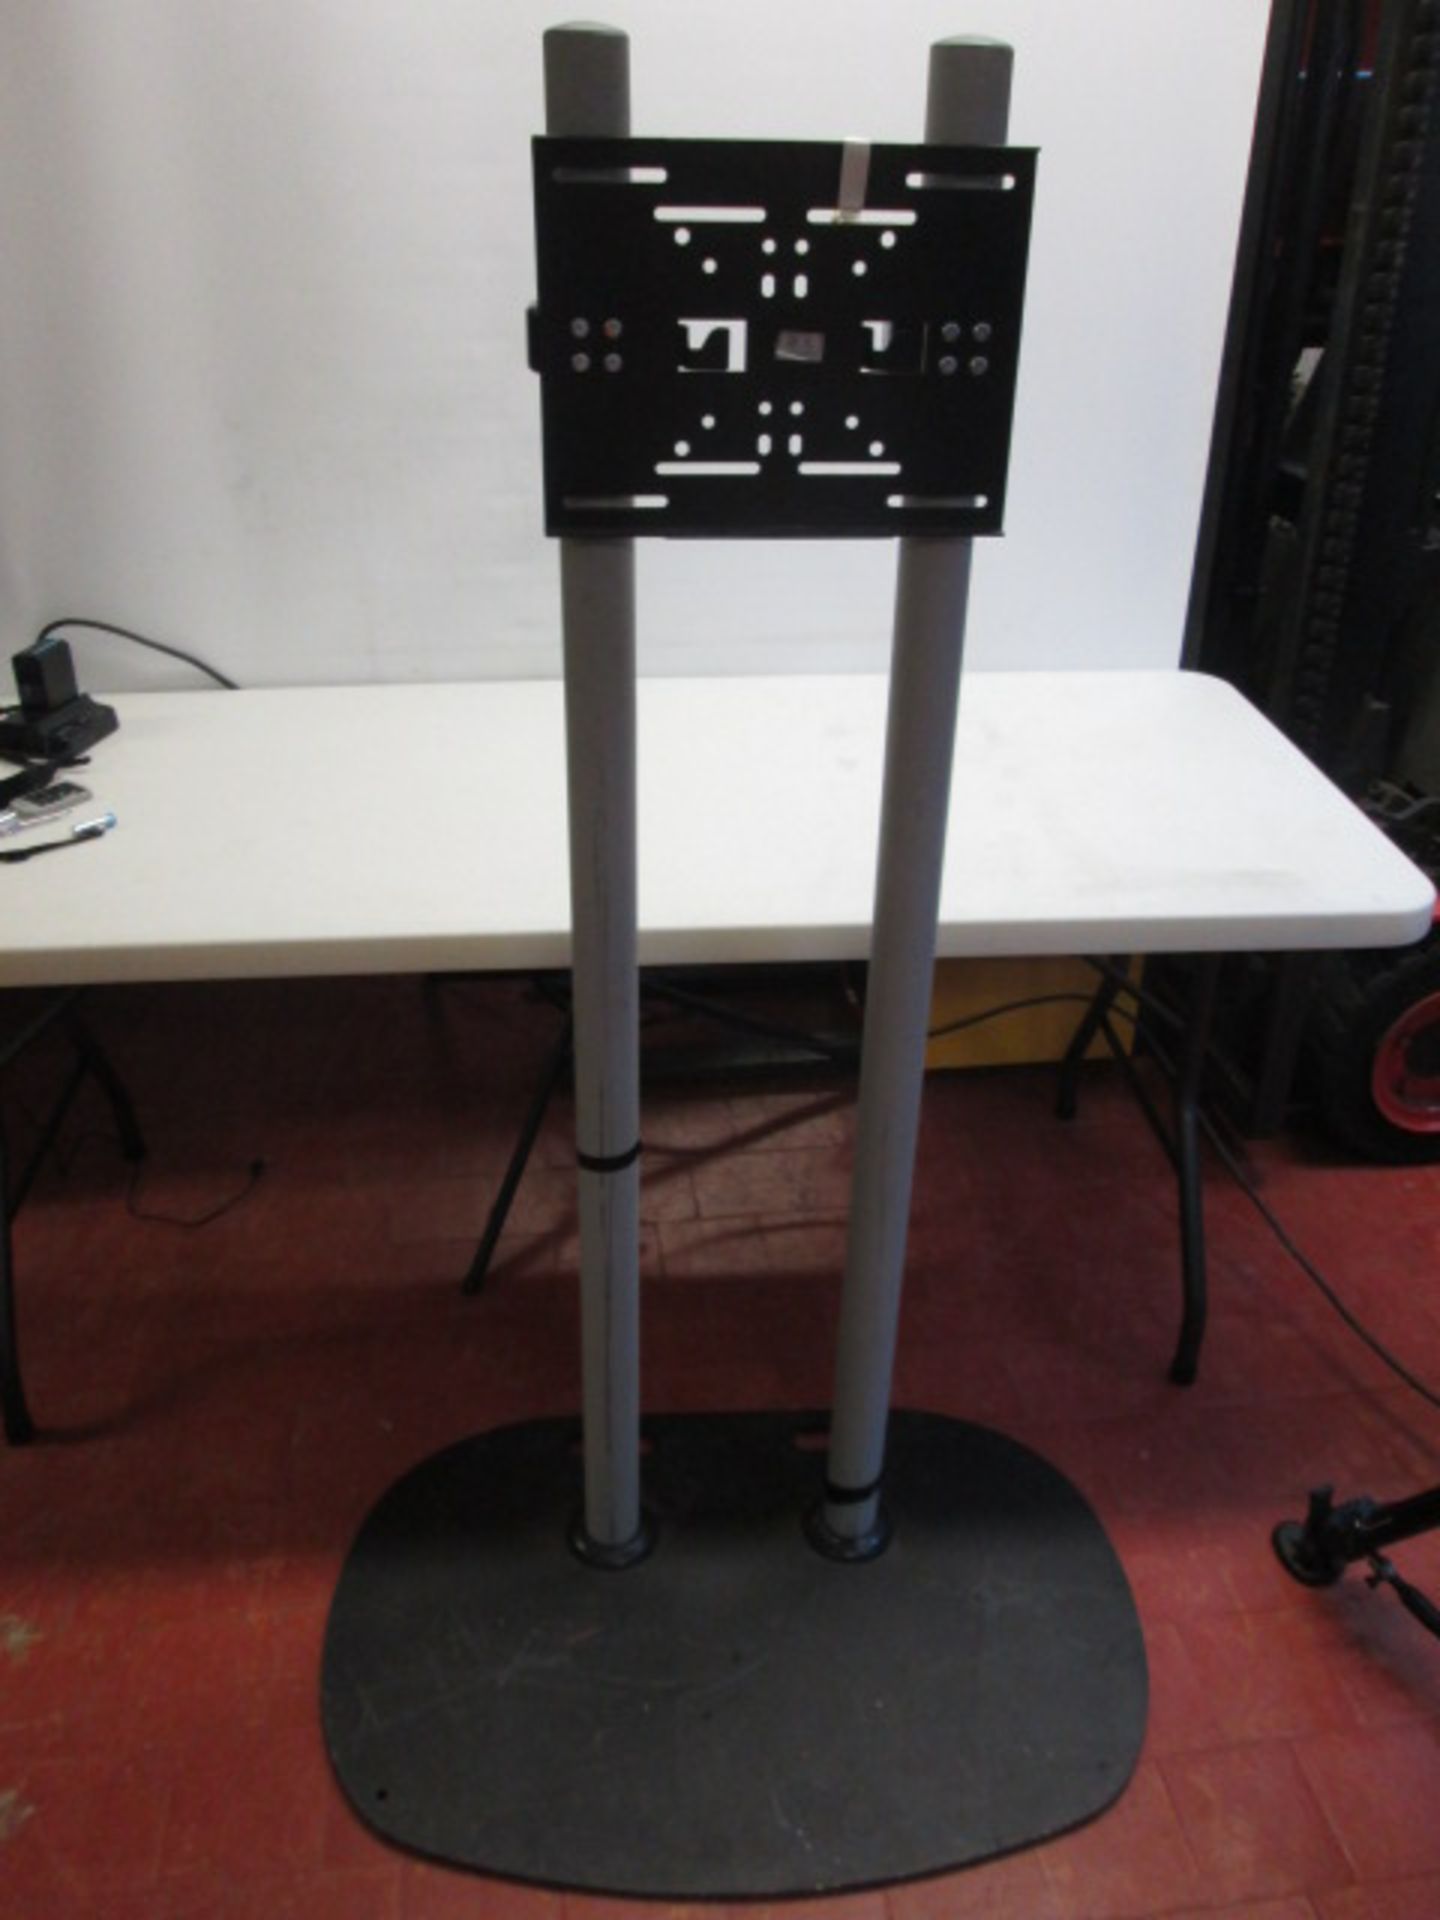 B-Tech Audio, Video Mount, 5ft Adjustable Height with TV Bracket Fixed. Max Cap 70kg/154lbs.